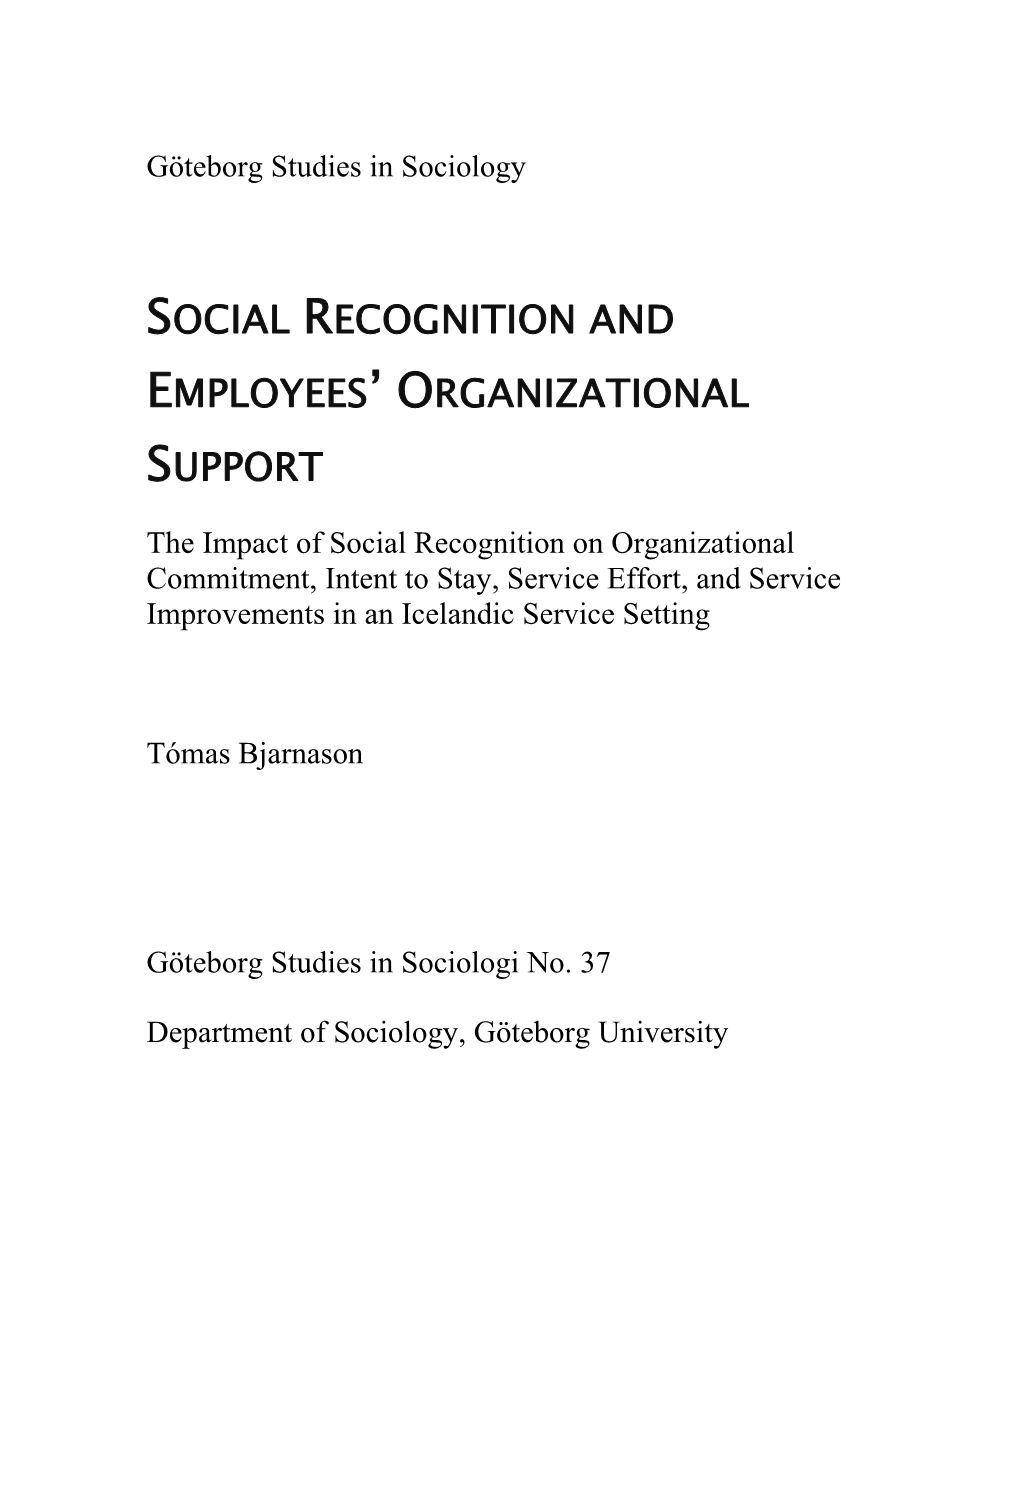 Social Recognition and Employees' Organizational Support